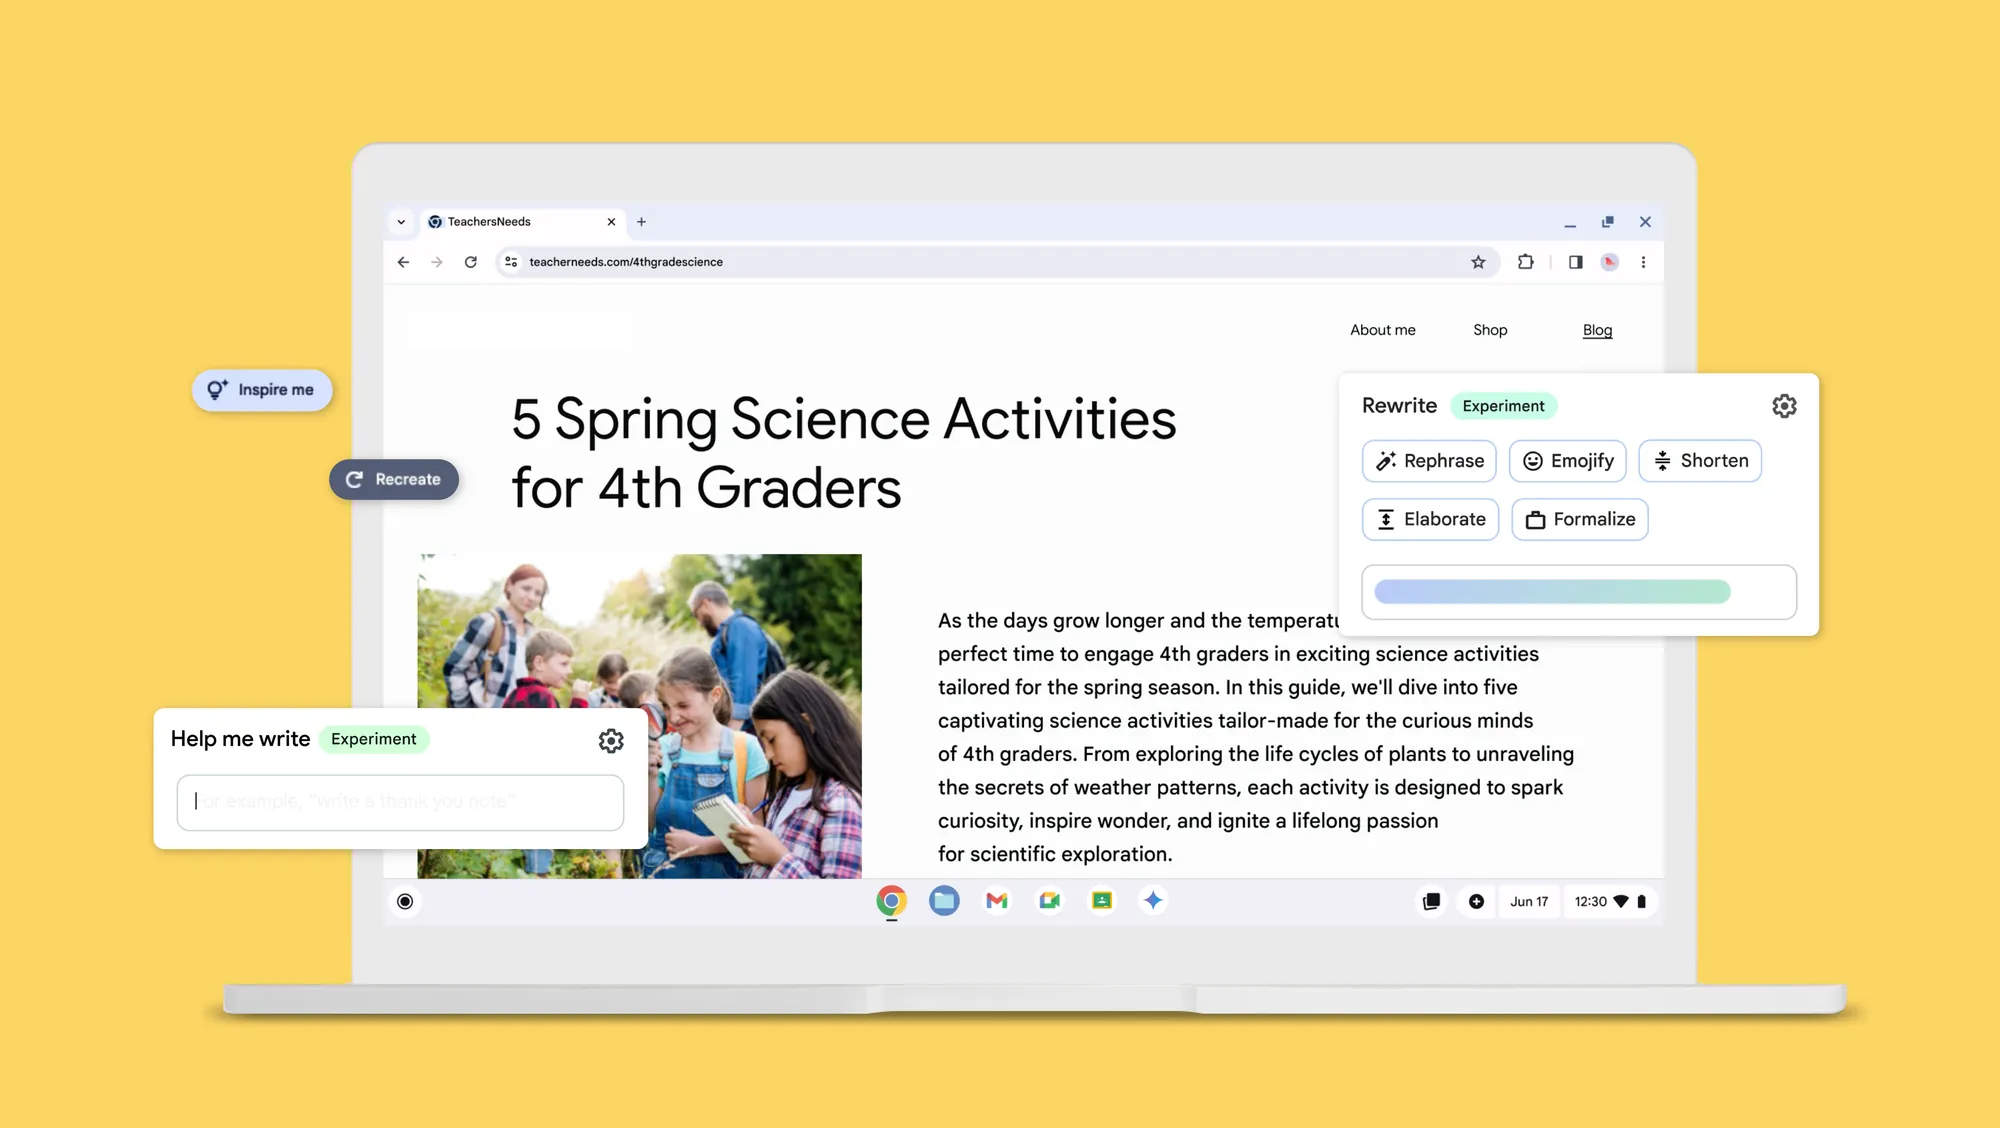 A colorful webpage with images popping out depicting the help me write feature on Chromebook Plus.